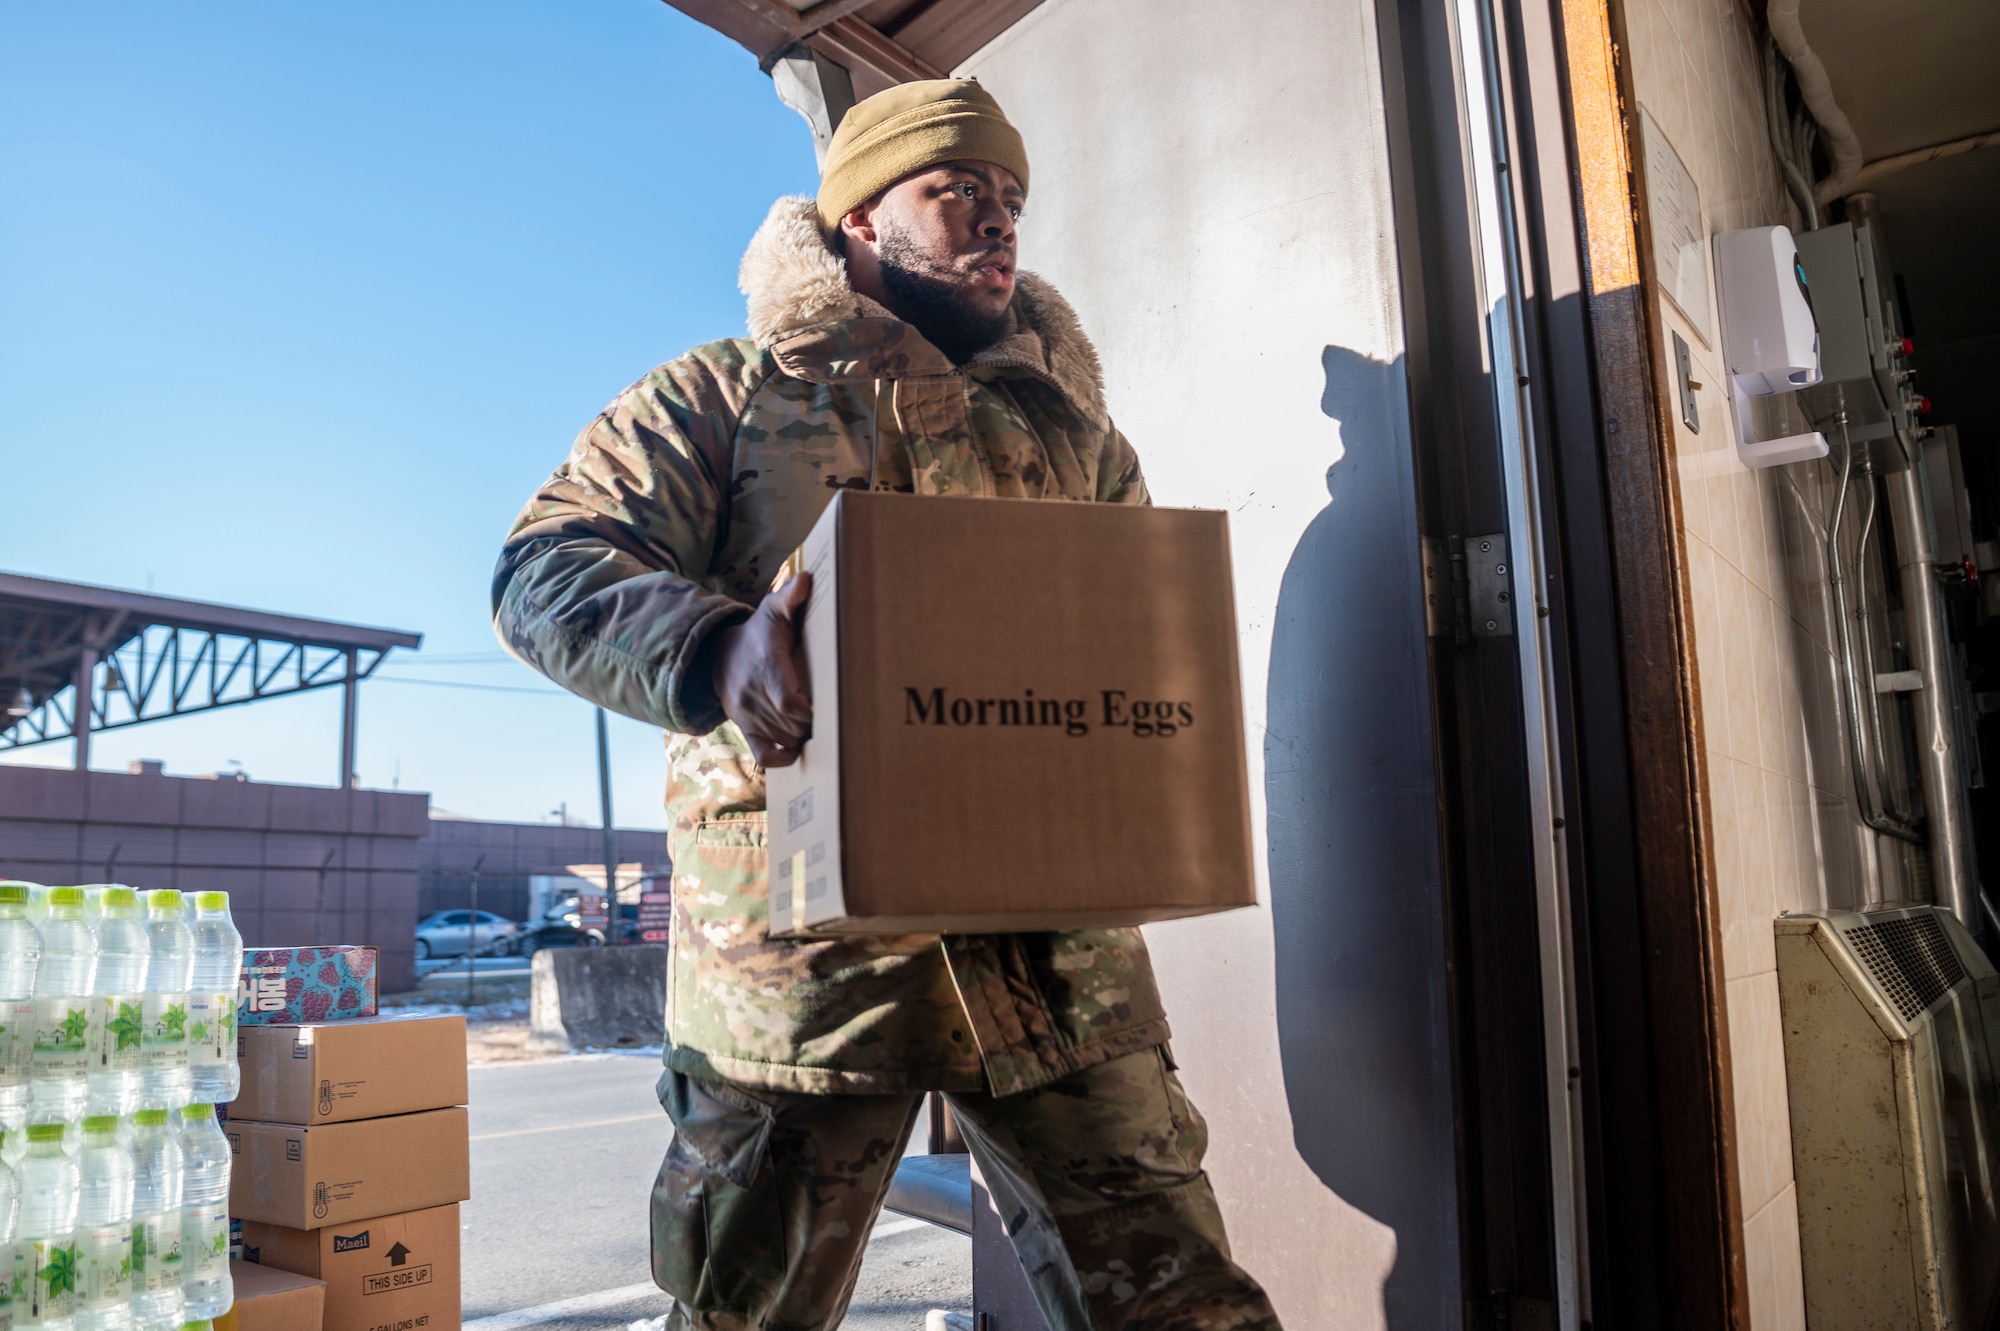 U.S. Air Force Senior Airman Kevin Jones, 51st Force Support Squadron food services journeyman, carries supplies into the flightline dining facility at Osan Air Base, Republic of Korea, Jan. 8, 2024. The facility serves Airmen daily to ensure that personnel have a convenient place to eat, enabling them to swiftly return to their critical tasks. (U.S. Air Force photo by Senior Airman Trevor Gordnier)